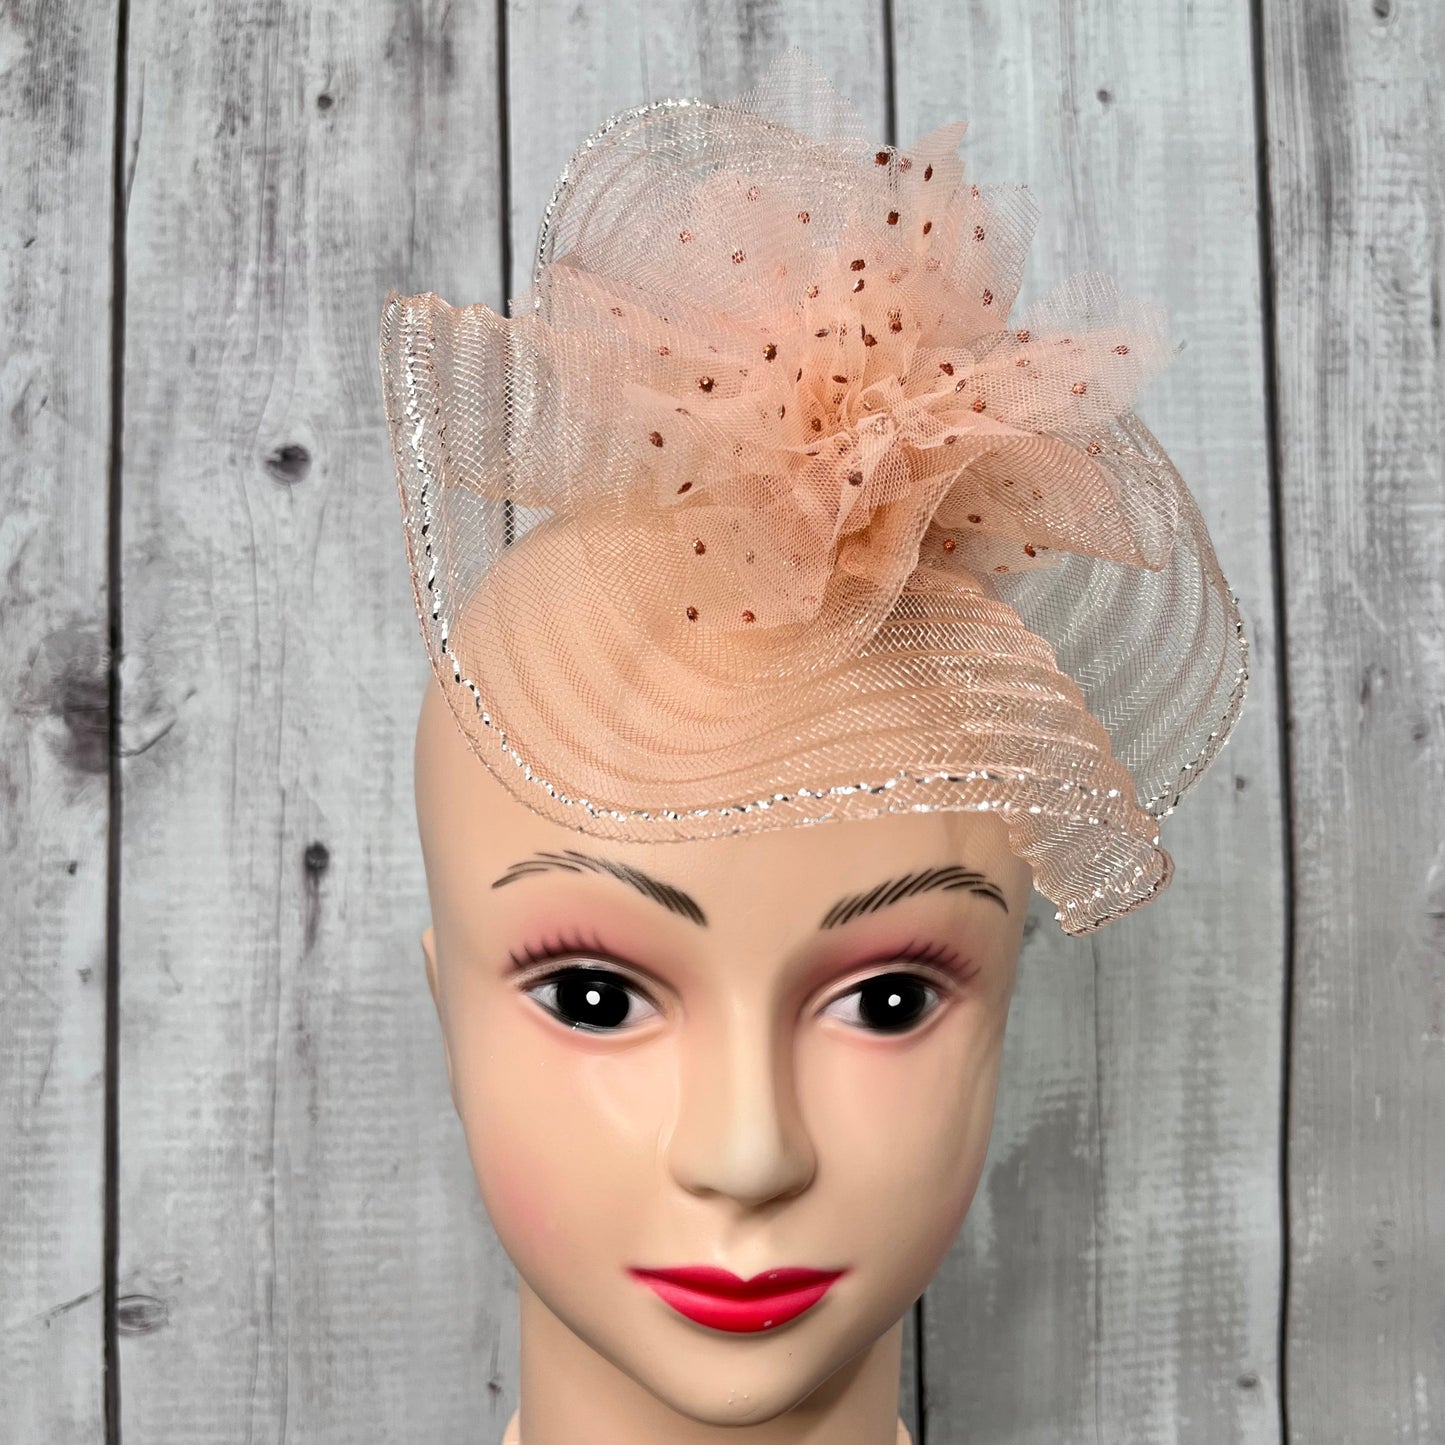 Blush Pink Fascinator Hat | Millinery Couture Headpiece